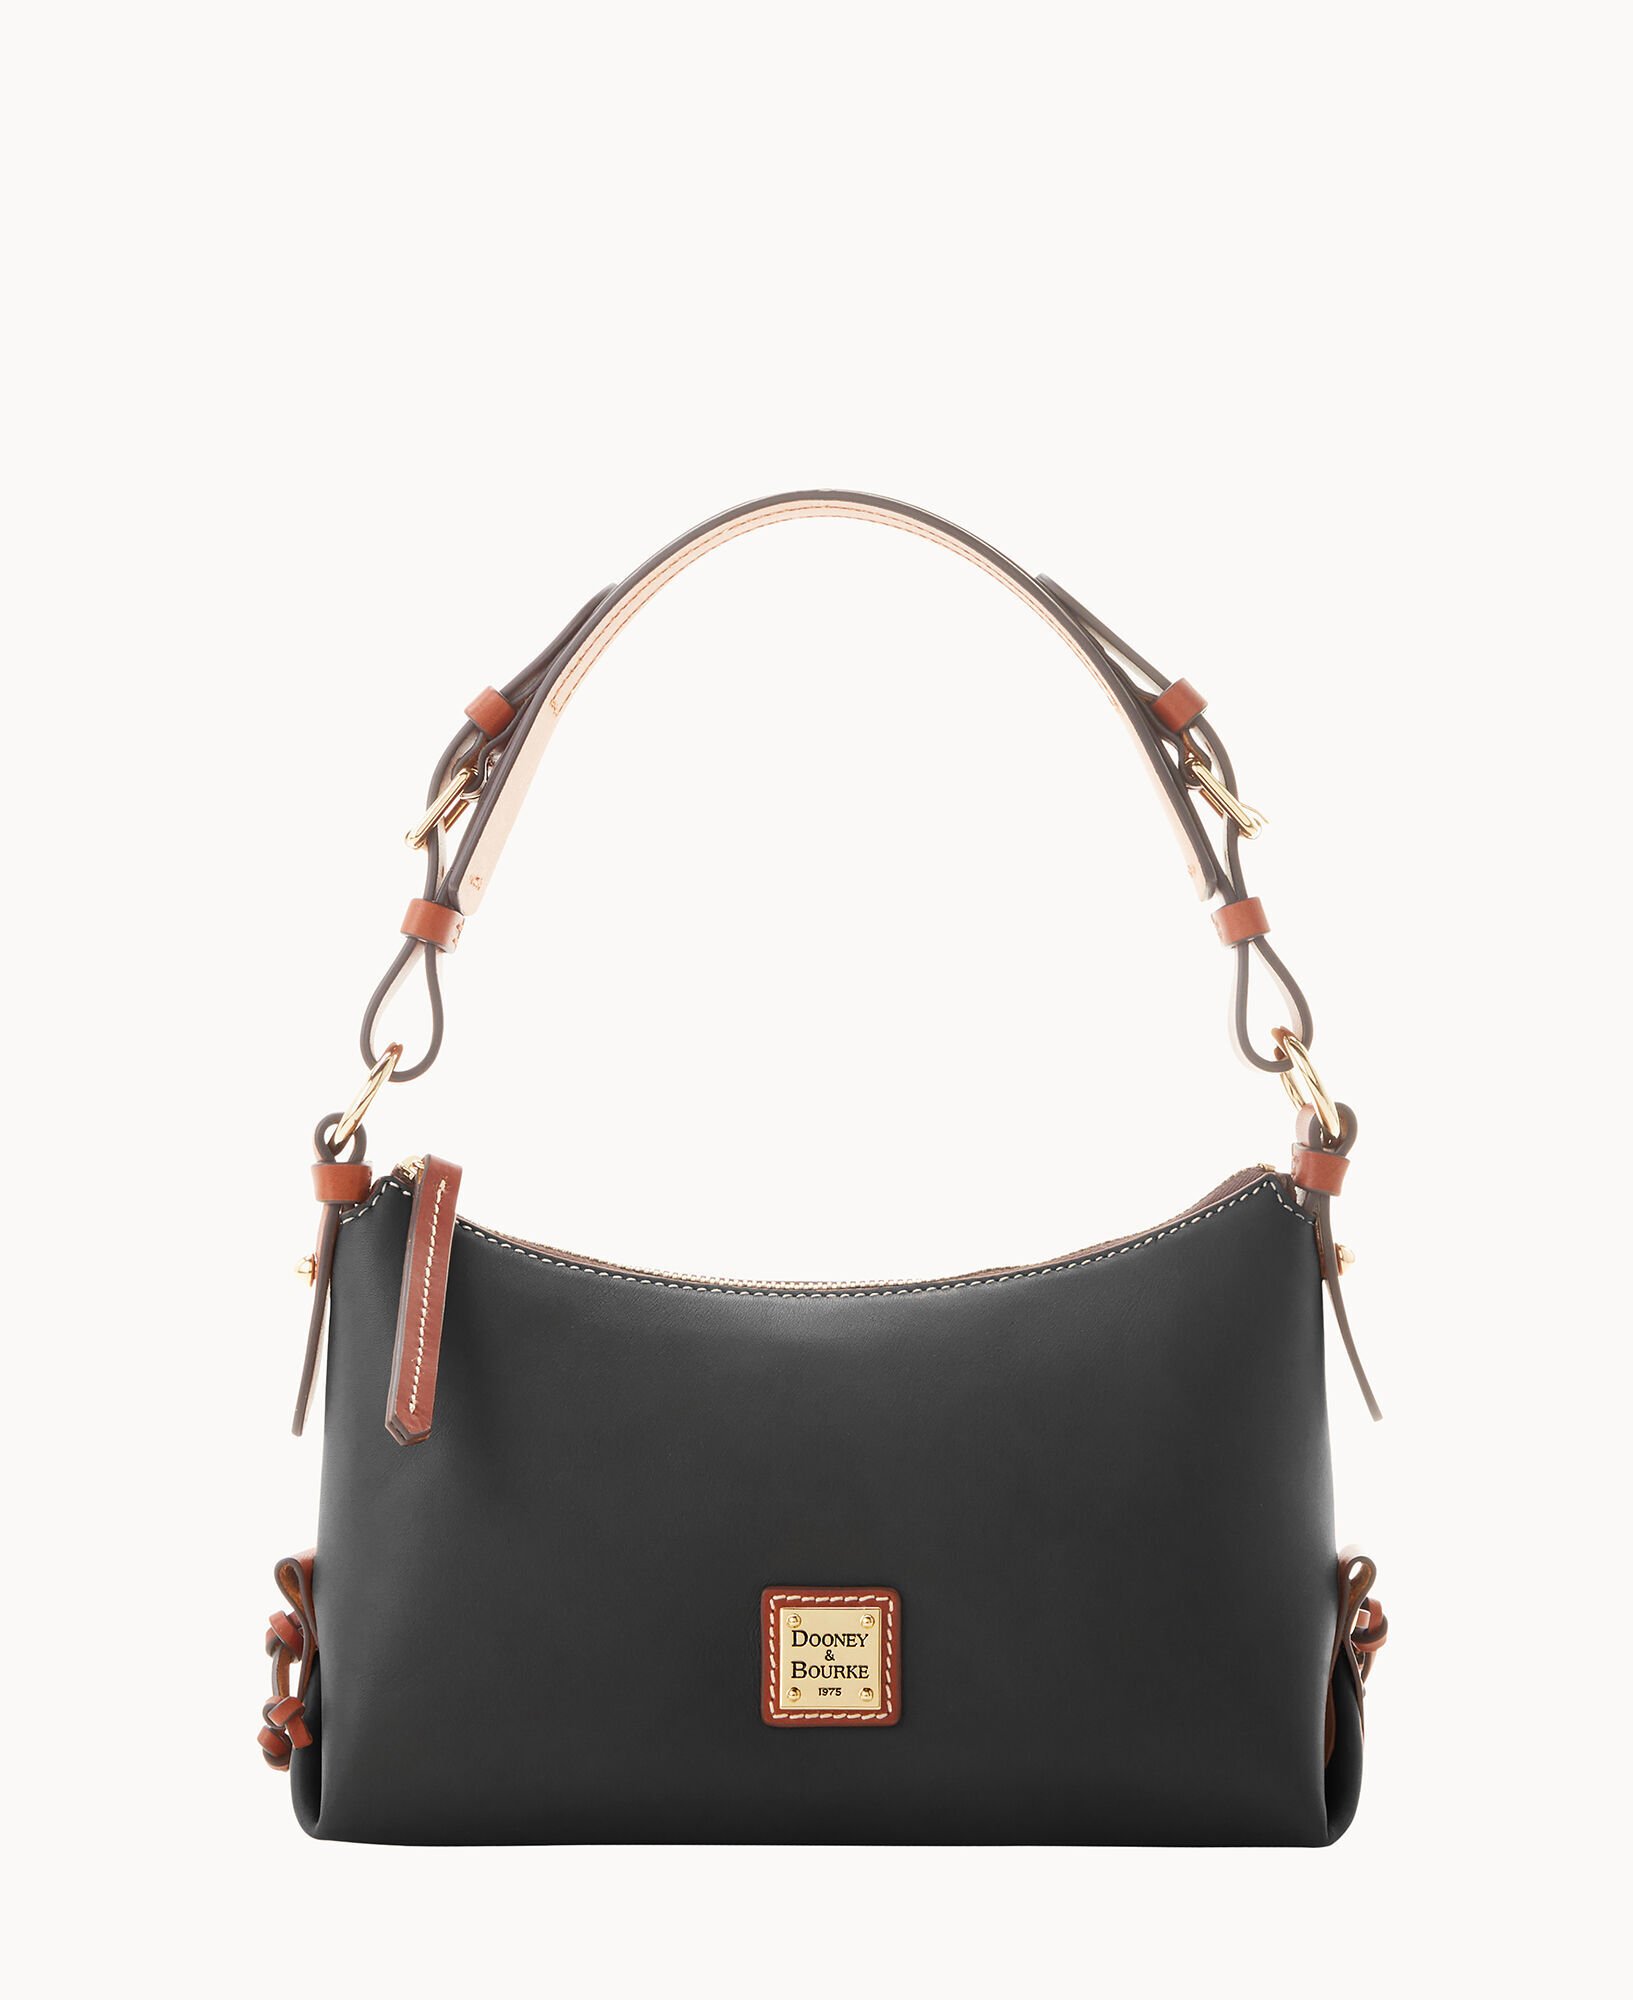 leather dooney and bourke purse